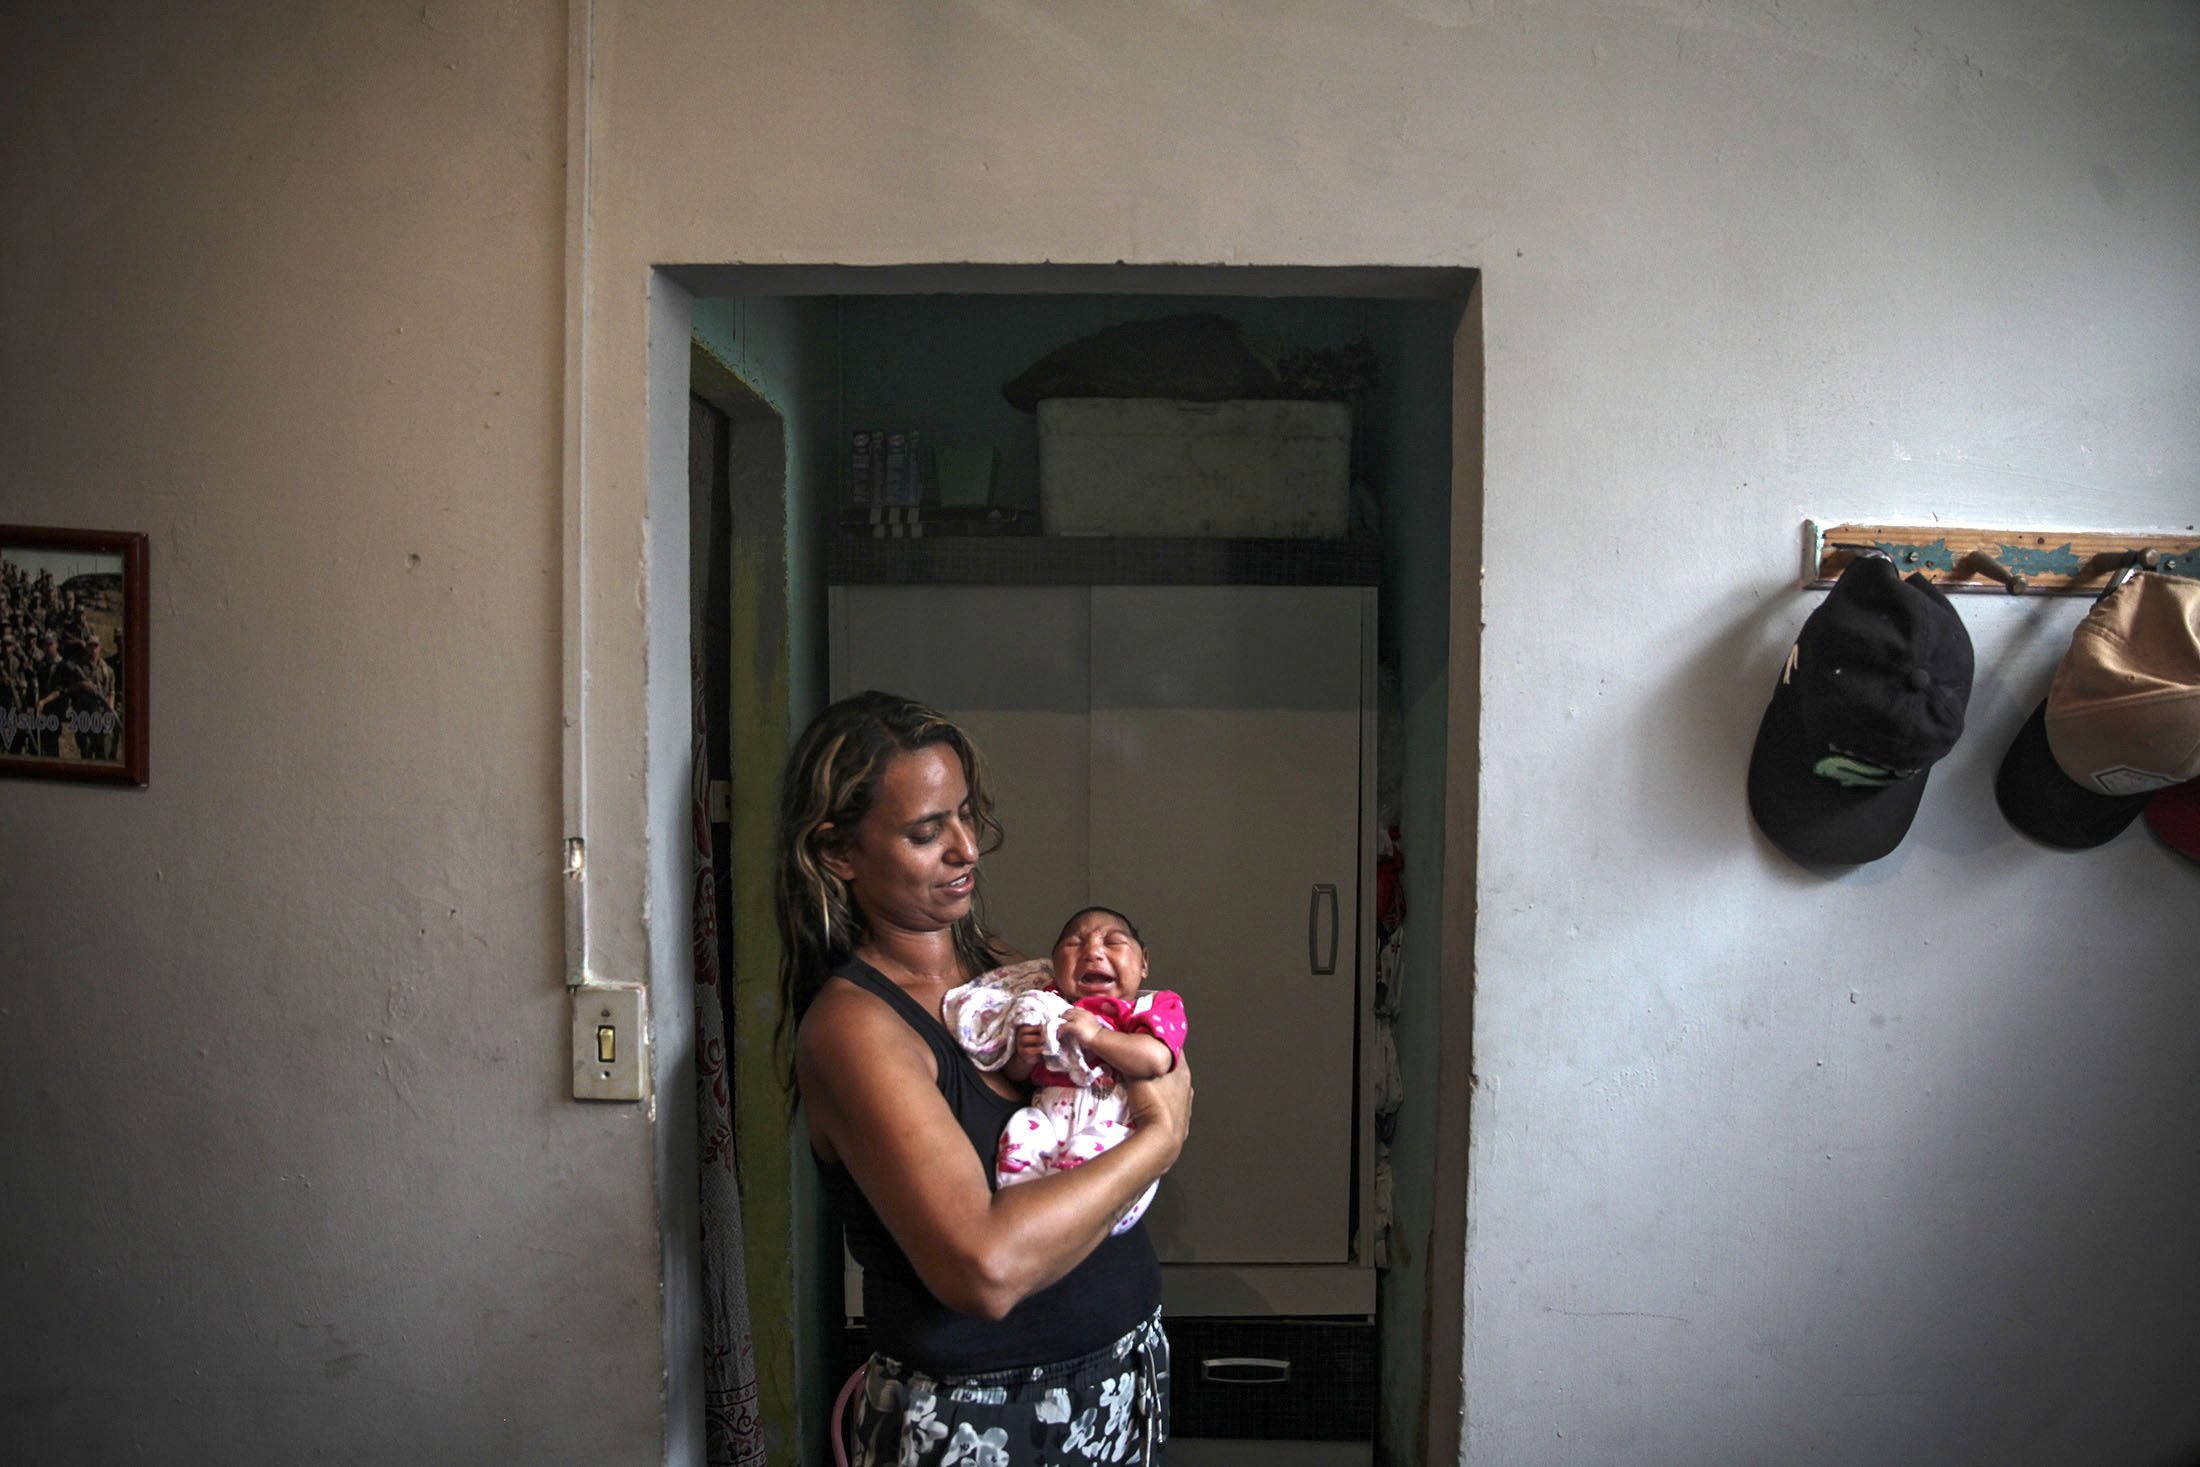 Patricia Vieira de Araujo holds her one-month-old granddaughter Manuelly Araujo da Cruz, who was born with microcephaly after being exposed to the zika virus during her mother's pregrnacy, in Rio de Janeiro, Brazil, Feb. 12, 2016. (Antonio Lacerda—EPA)